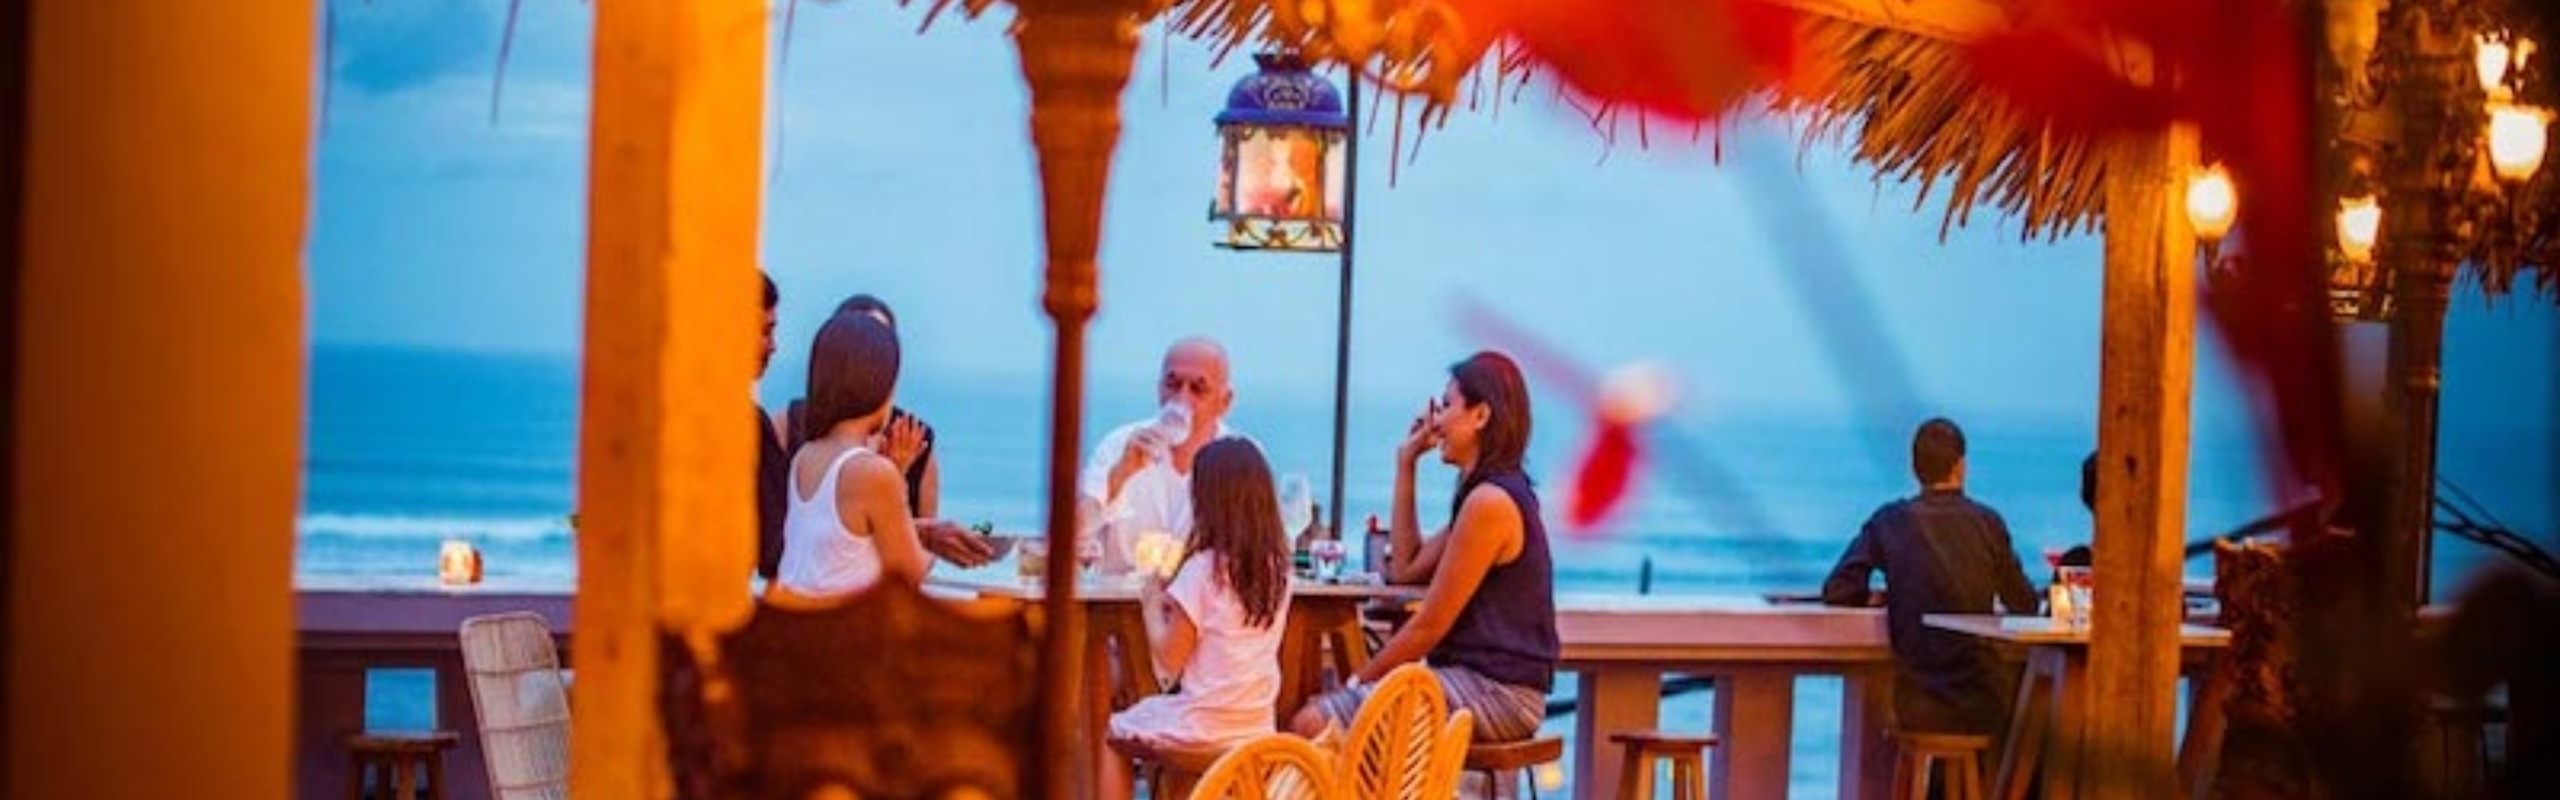 Best 12 Beach Clubs in Bali for Adults, Famlies with Kids